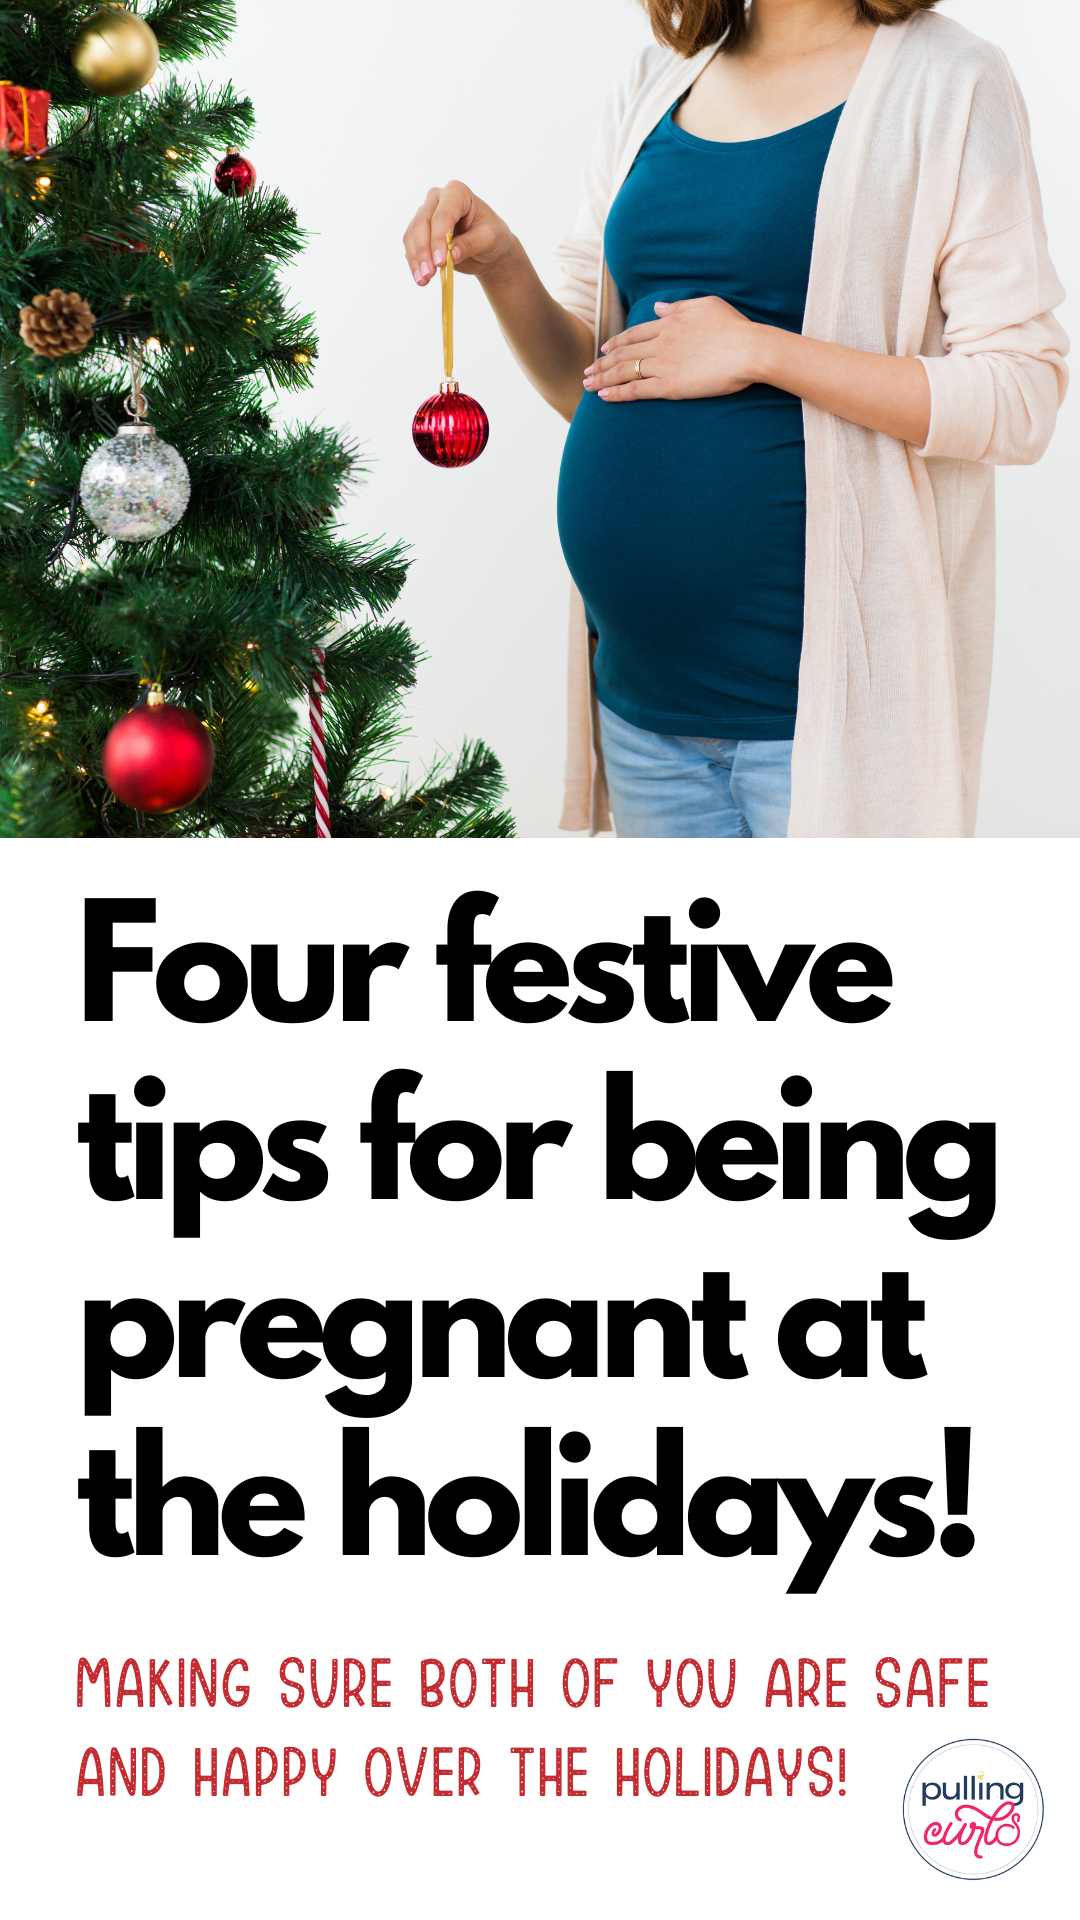 pregnant woman decorating a tree / four festive tips for being pregnant at the holidays. Making sure BOTH of you are safe and happy over the holidays! via @pullingcurls